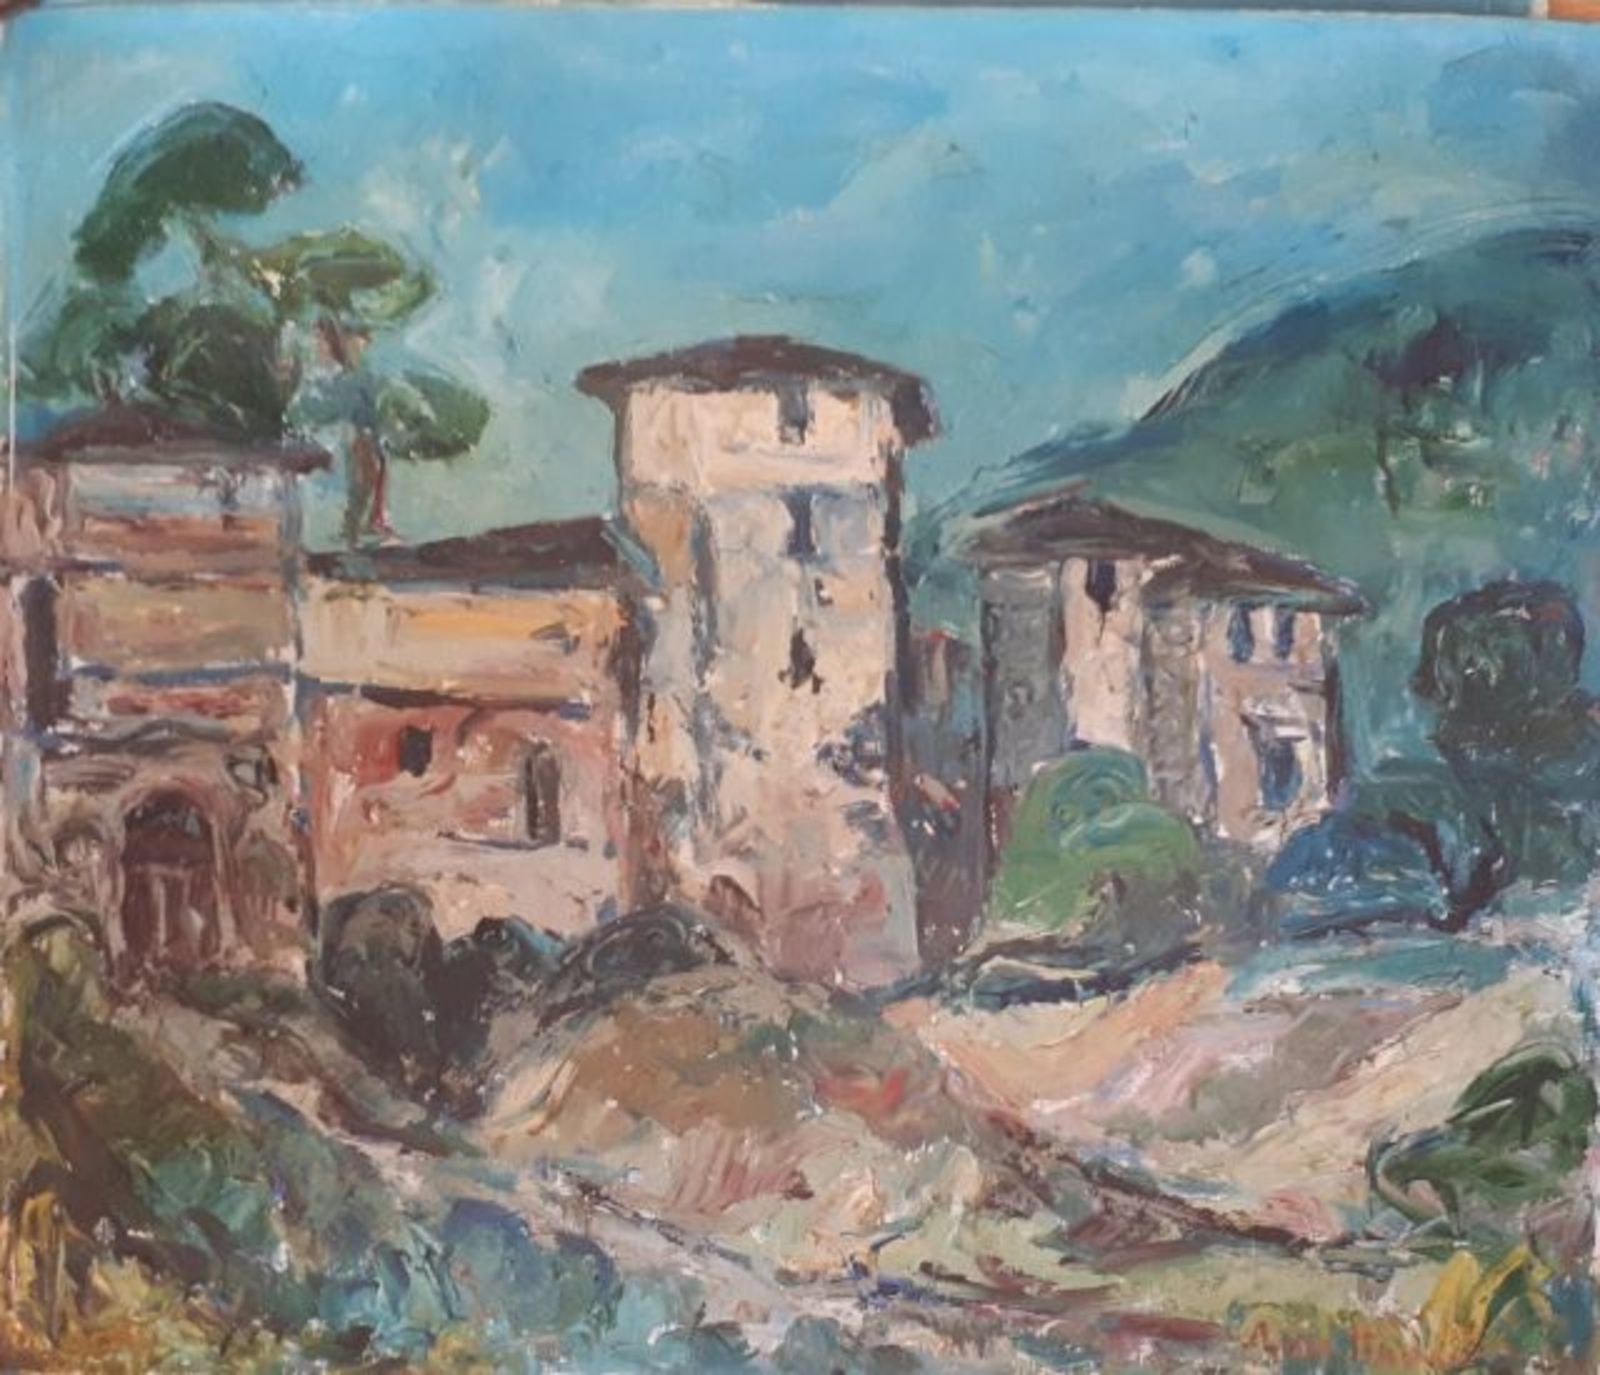 The State Institute for Culture Presents an Online Exhibition of Paintings from the Foreign Missions of the Republic of Bulgaria in Beirut and Damascus